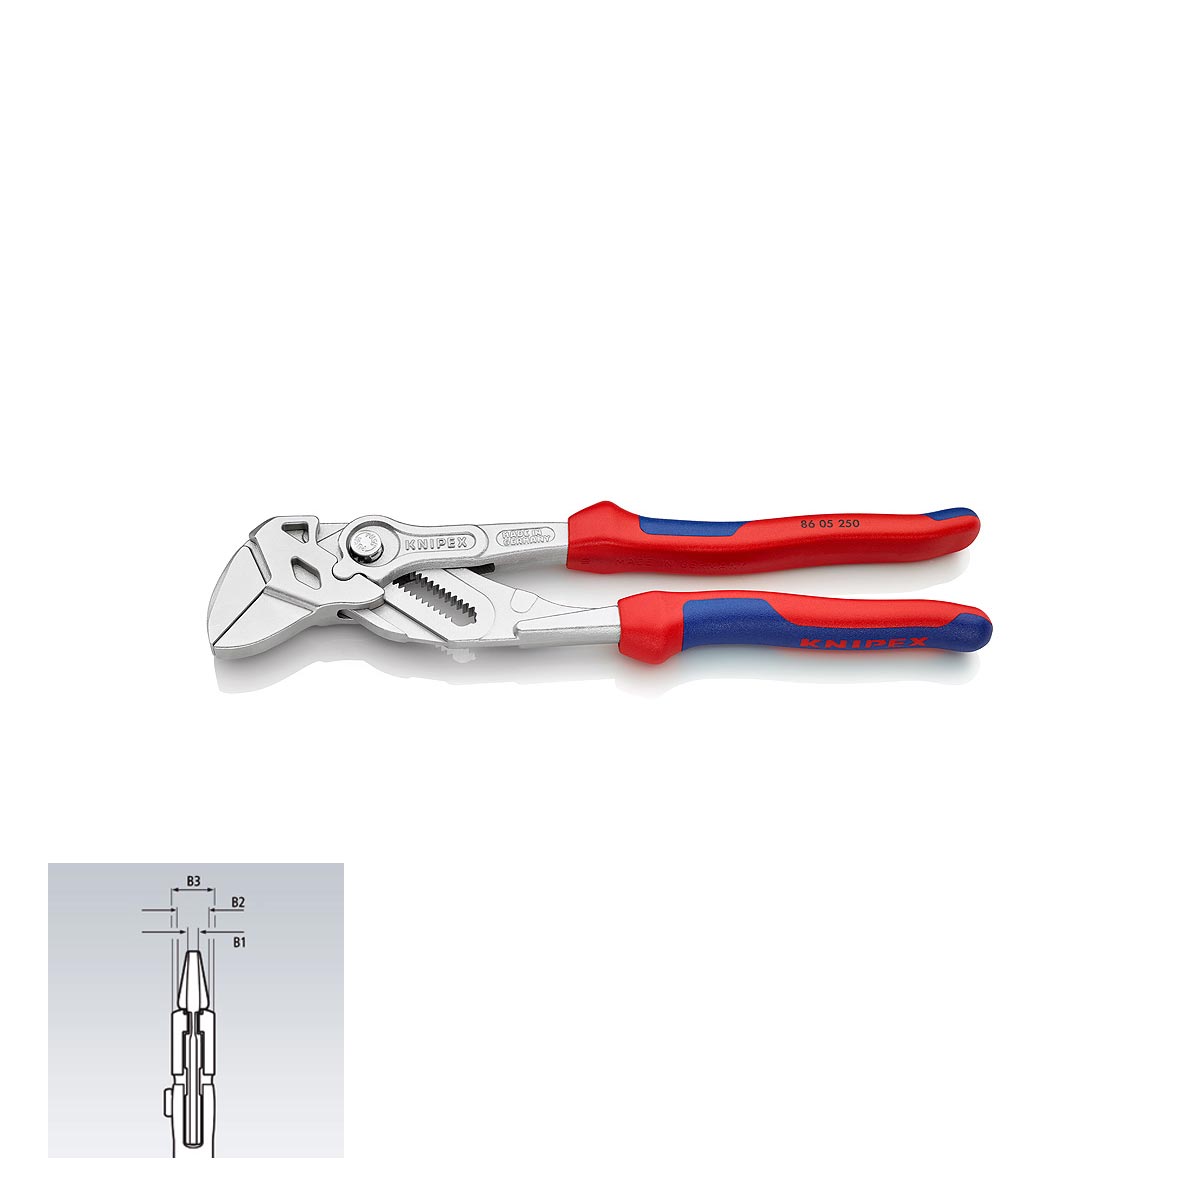 KNIPEX 86 05 250 Pliers wrench, 250.0 mm